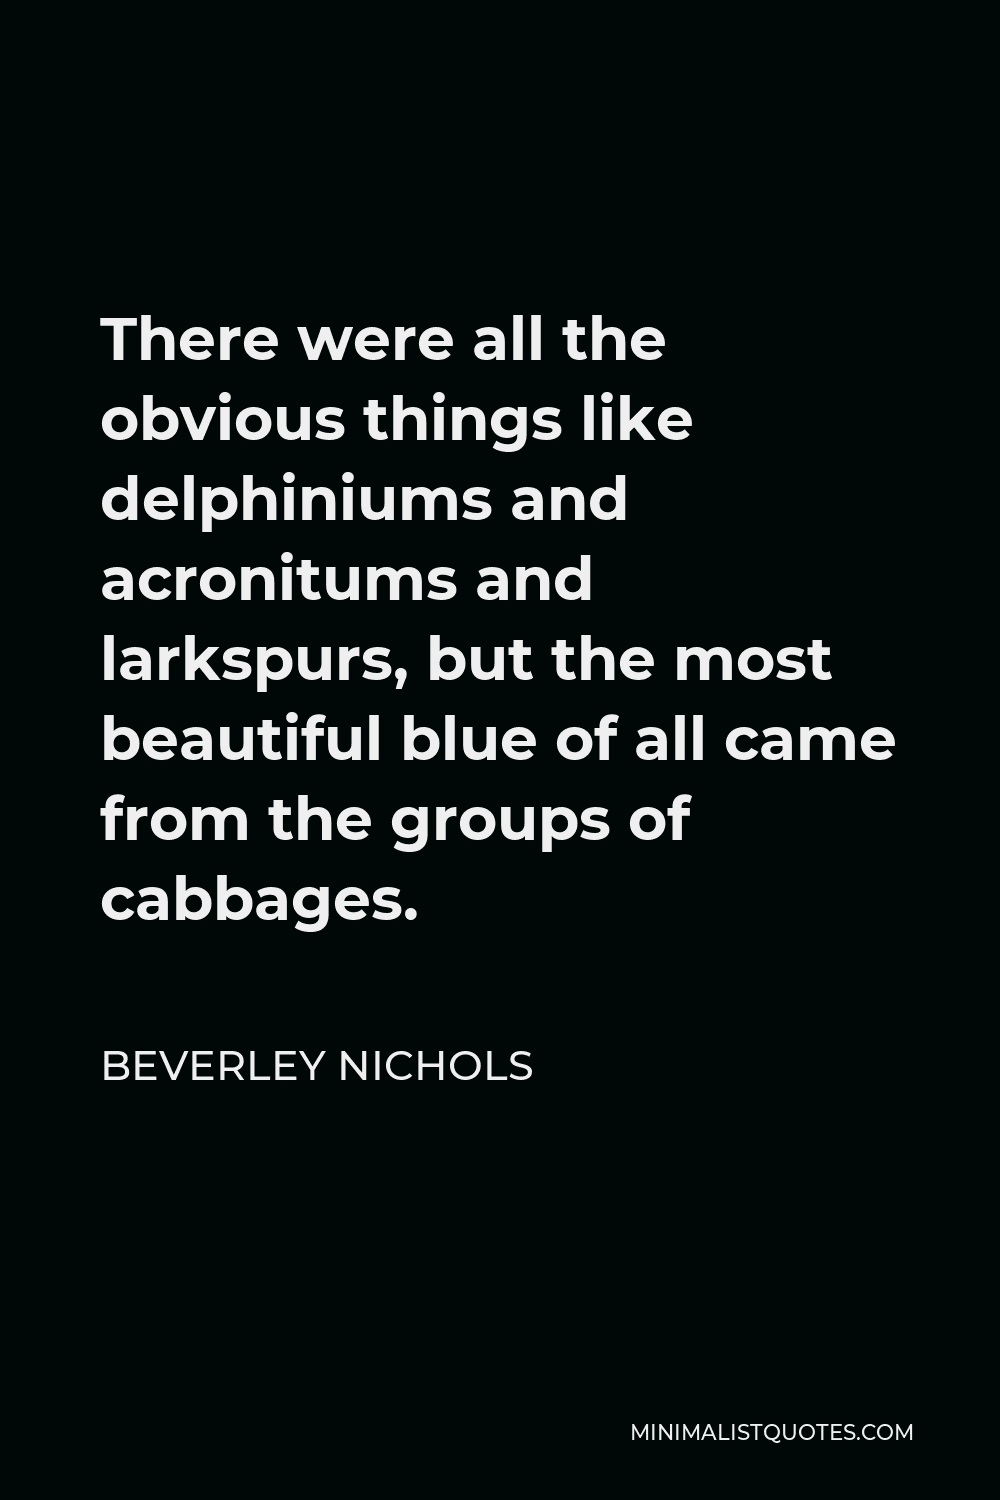 Beverley Nichols Quote - There were all the obvious things like delphiniums and acronitums and larkspurs, but the most beautiful blue of all came from the groups of cabbages.